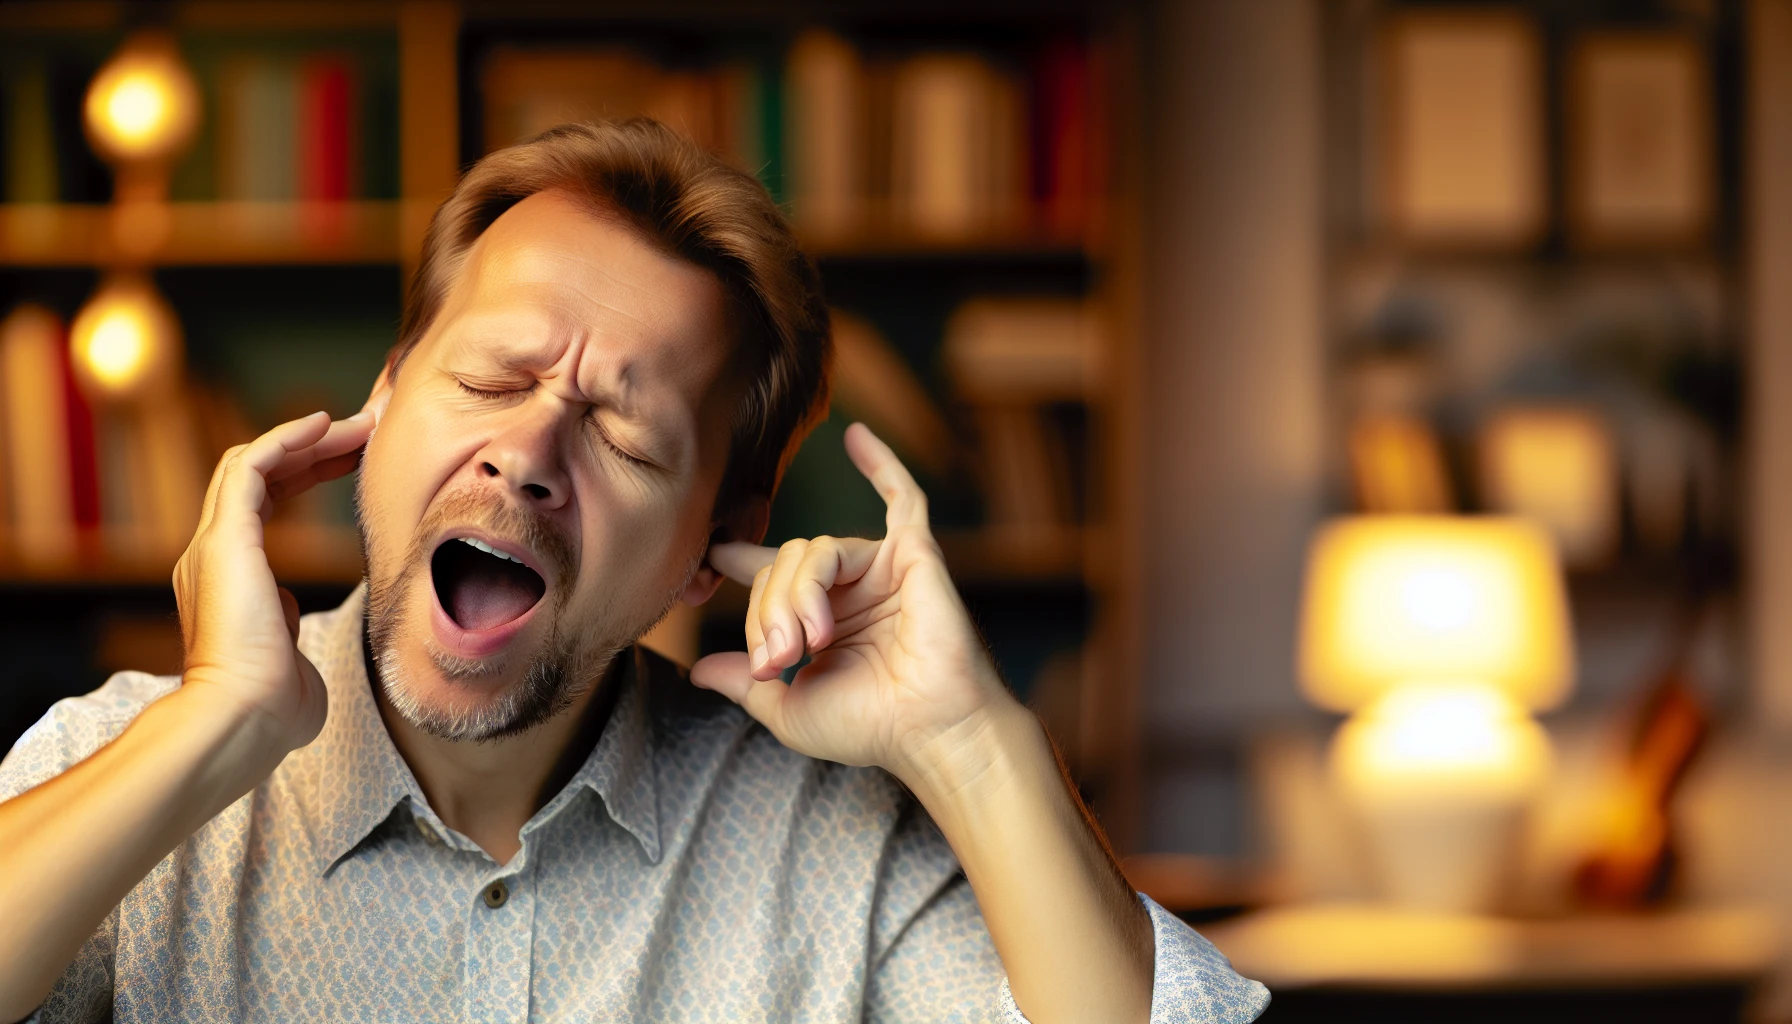 Photo of person yawning to relieve ear pressure